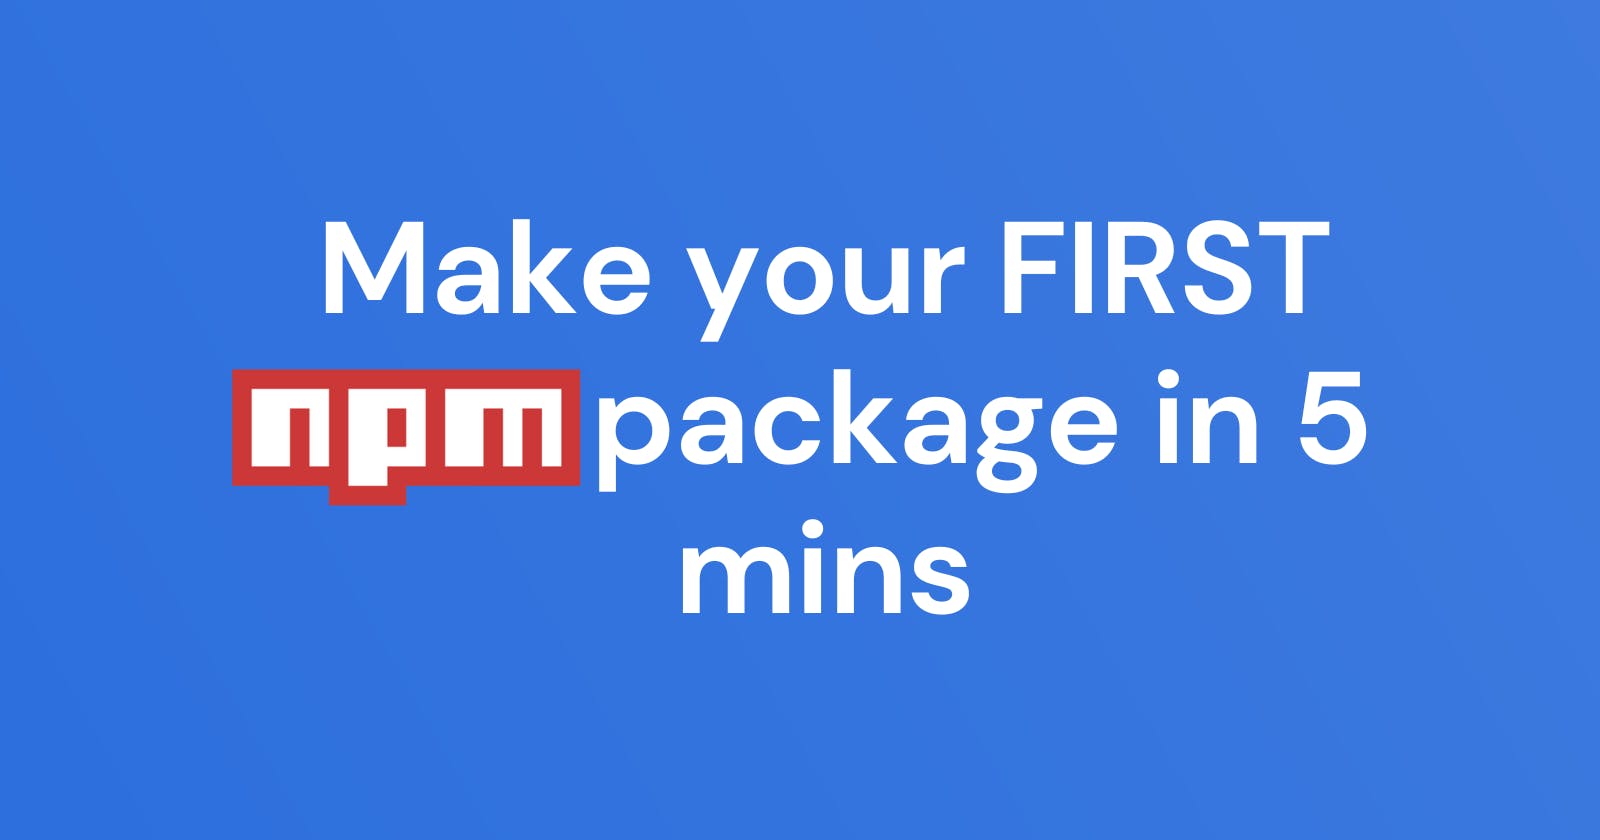 Make your first NPM package and publish it in 5 mins